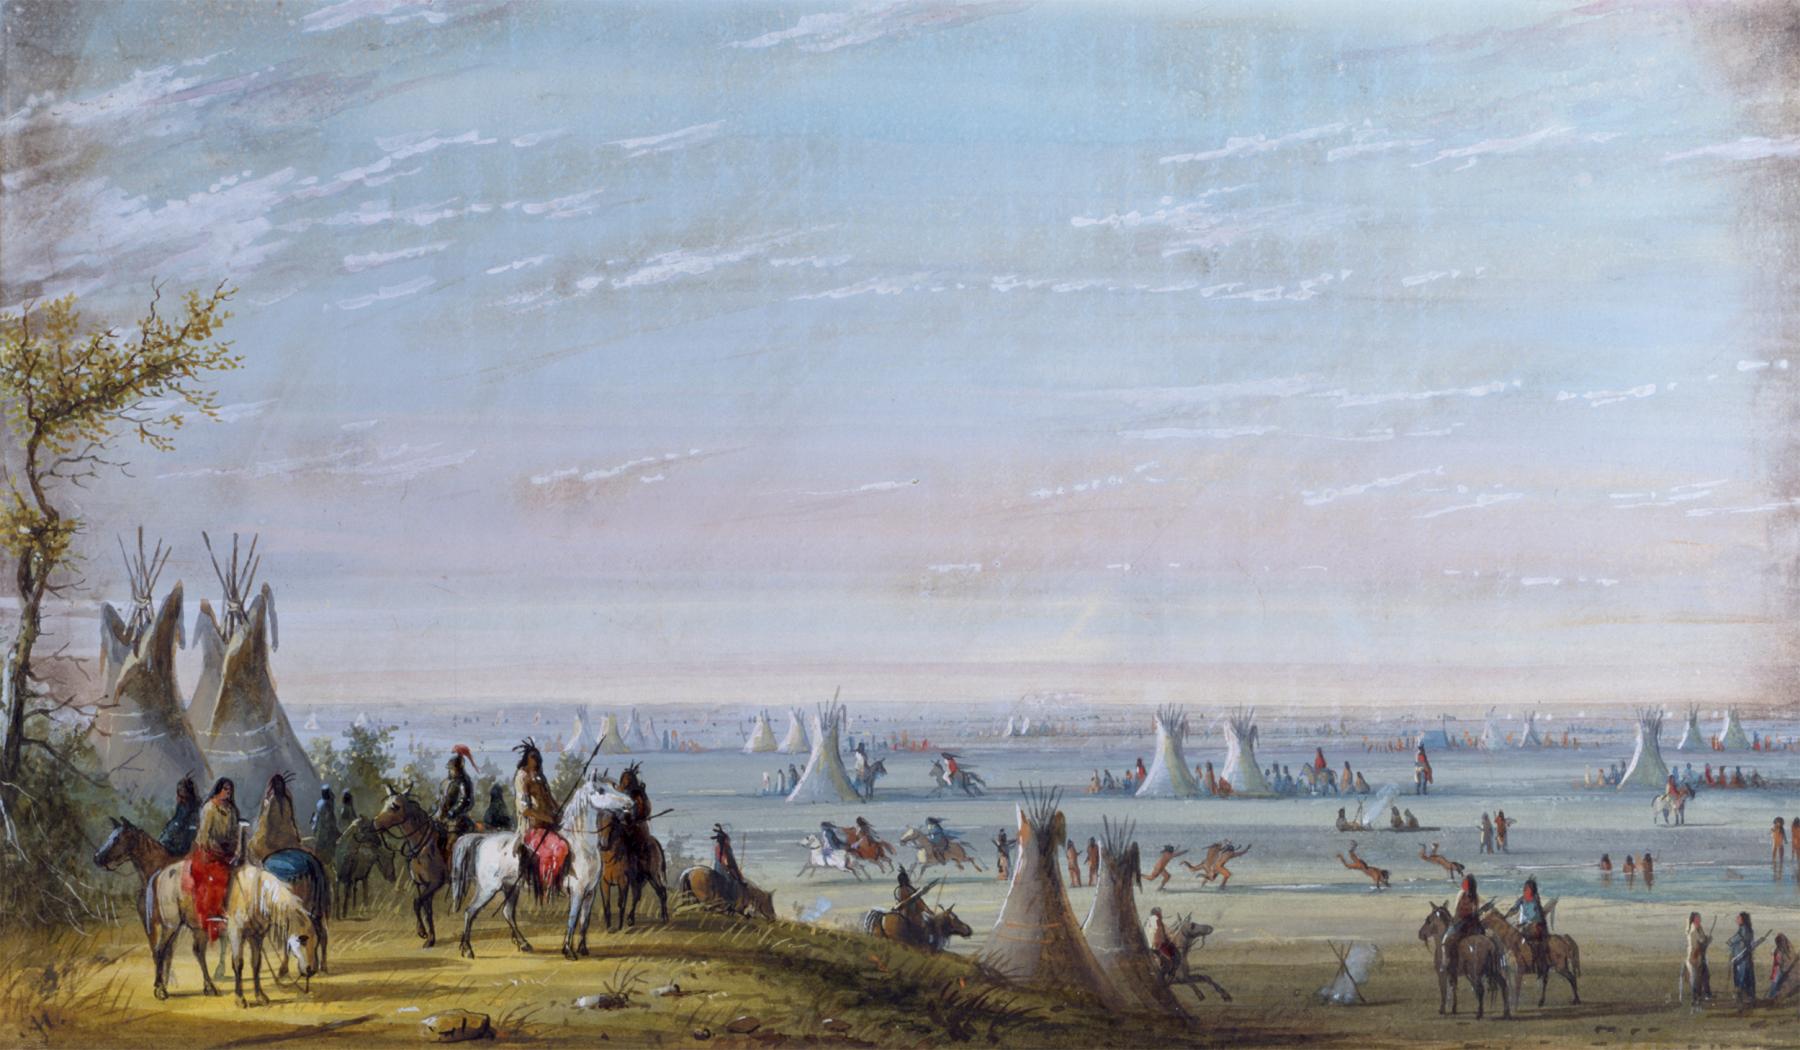 Romantic painter Alfred Jacob Miller’s view of the 1837 Rendezvous, with footraces, horse races and people swimming, shows a calmer event than the “scenes of the most extreme debauchery and dissipation” Bonneviille described in 1833. Walters Art Museum. 